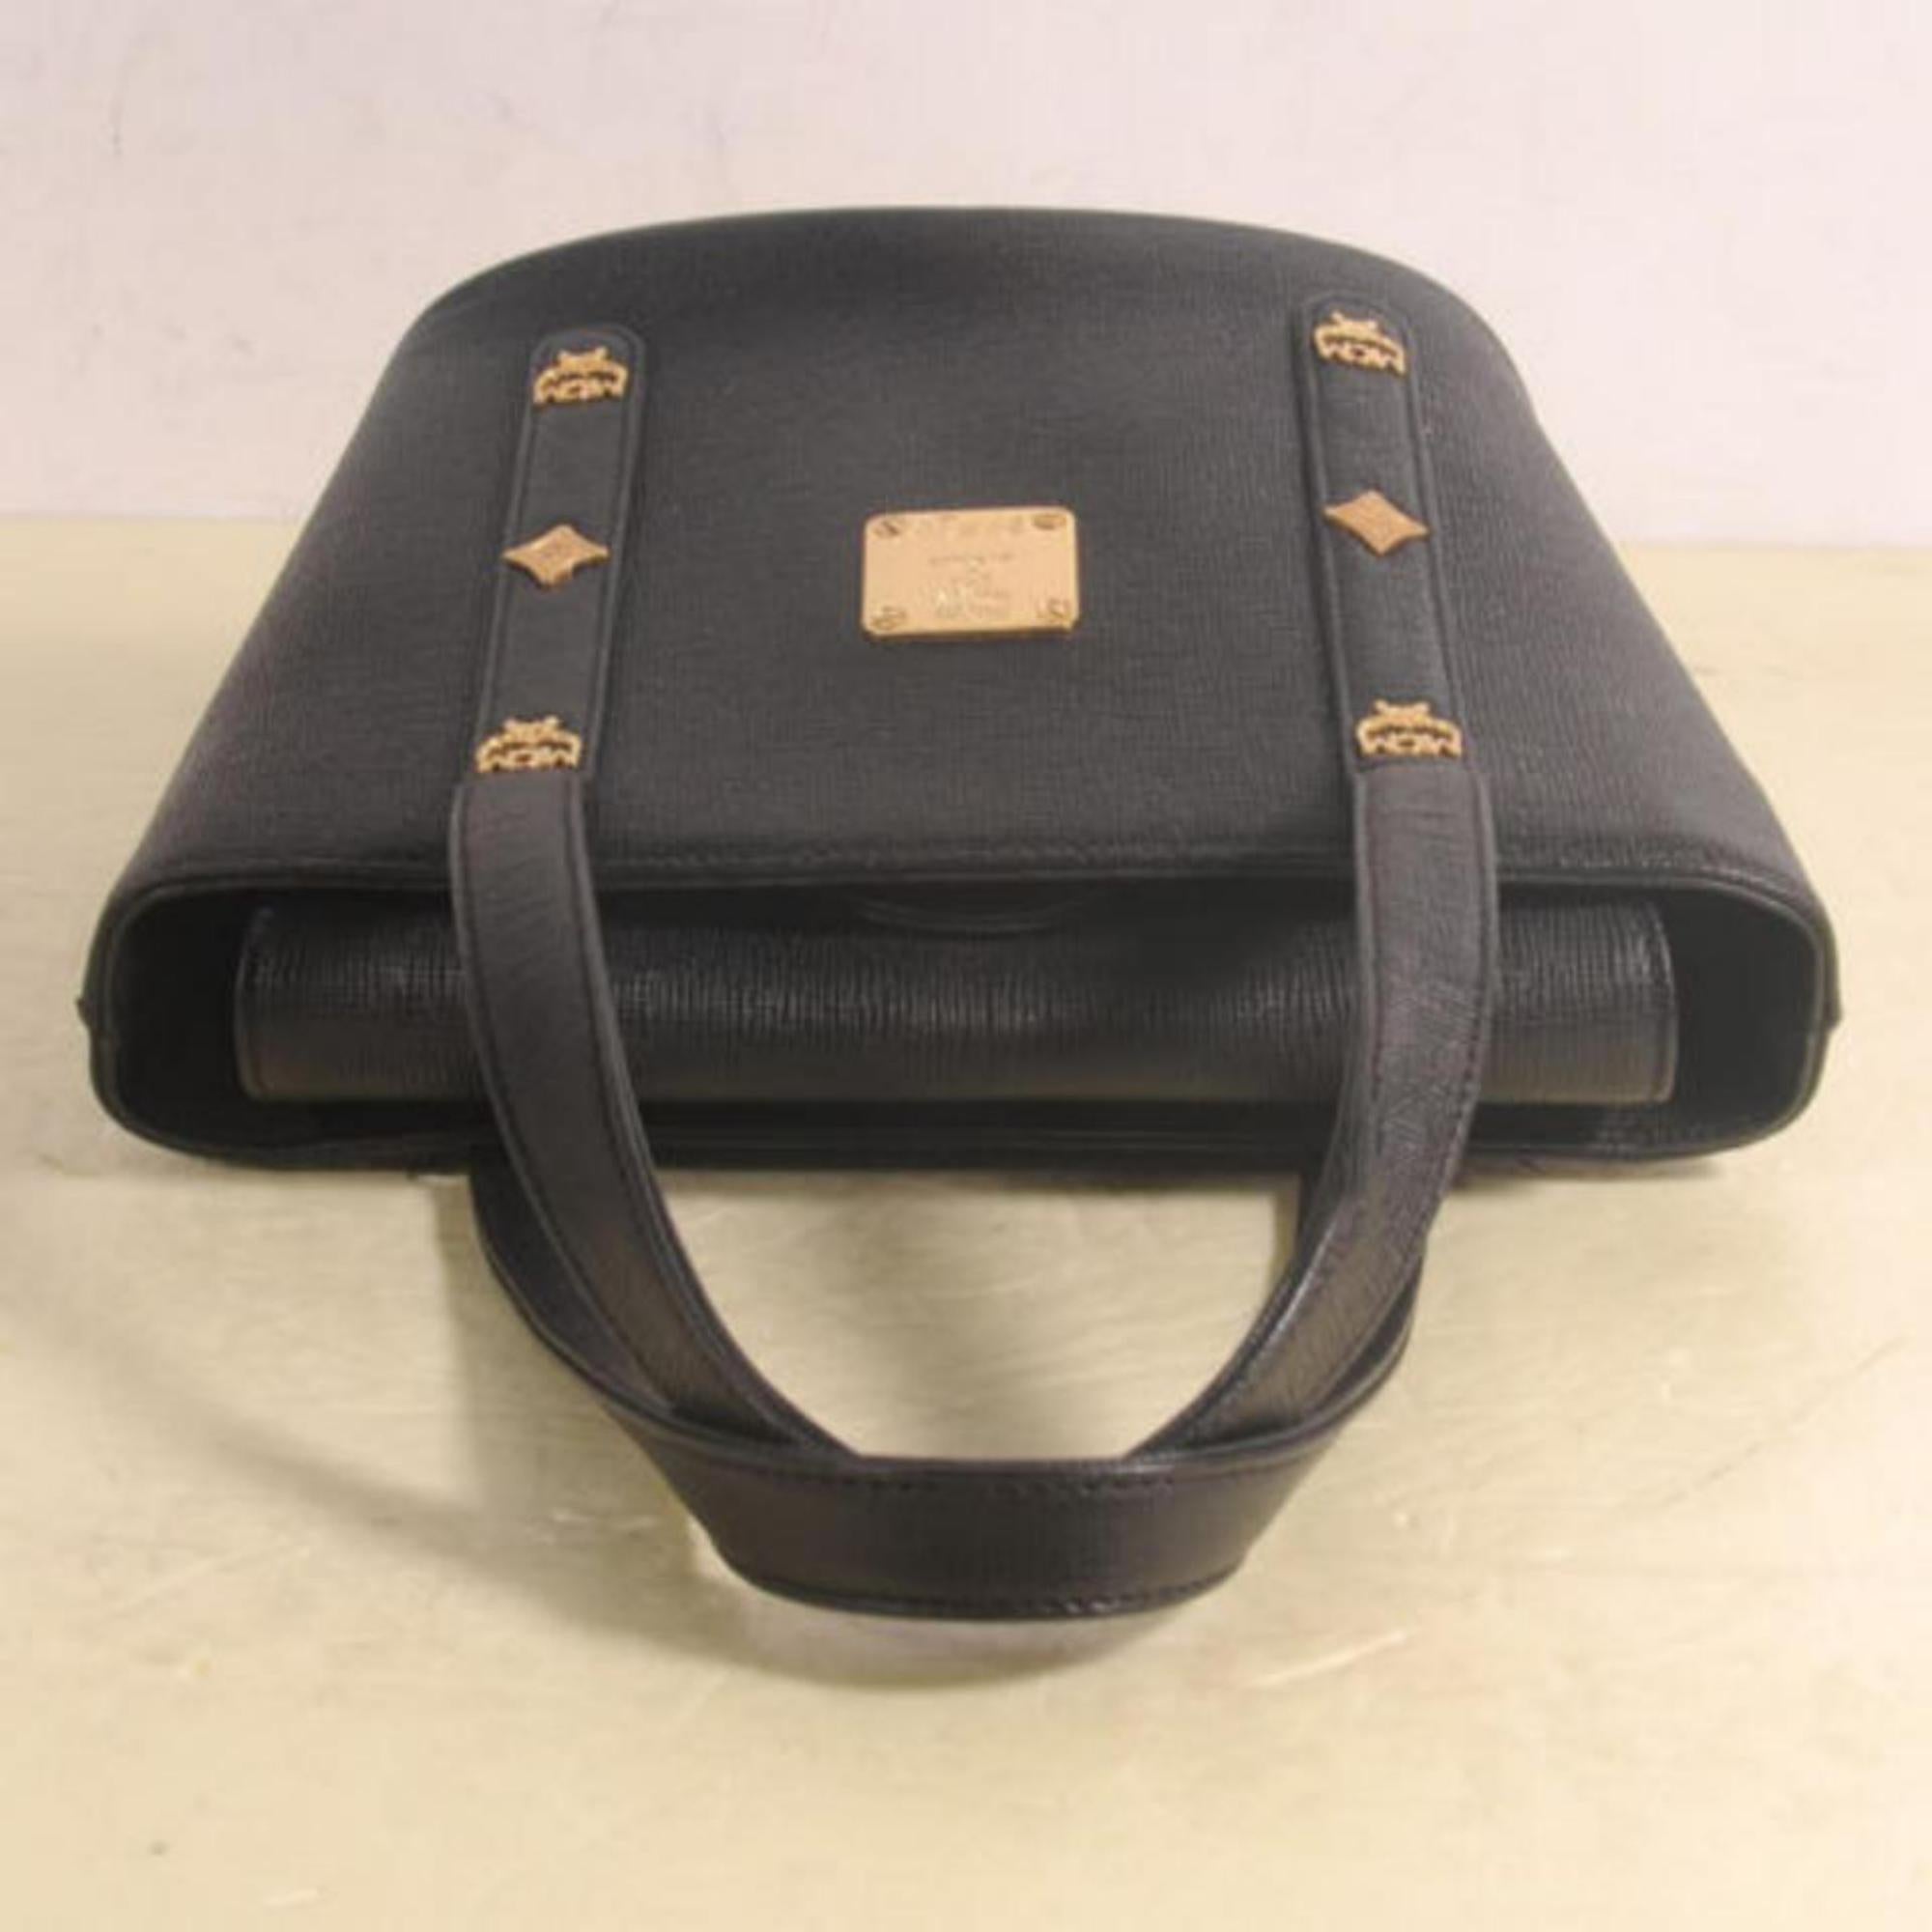 VERY GOOD VINTAGE CONDITION
(7.5/10 or B+)
Includes Dust Bag
This item does not come with any extra accessories.
Please review photos for more details.
Color appearance may vary depending on your monitor settings.
SKU : 869501